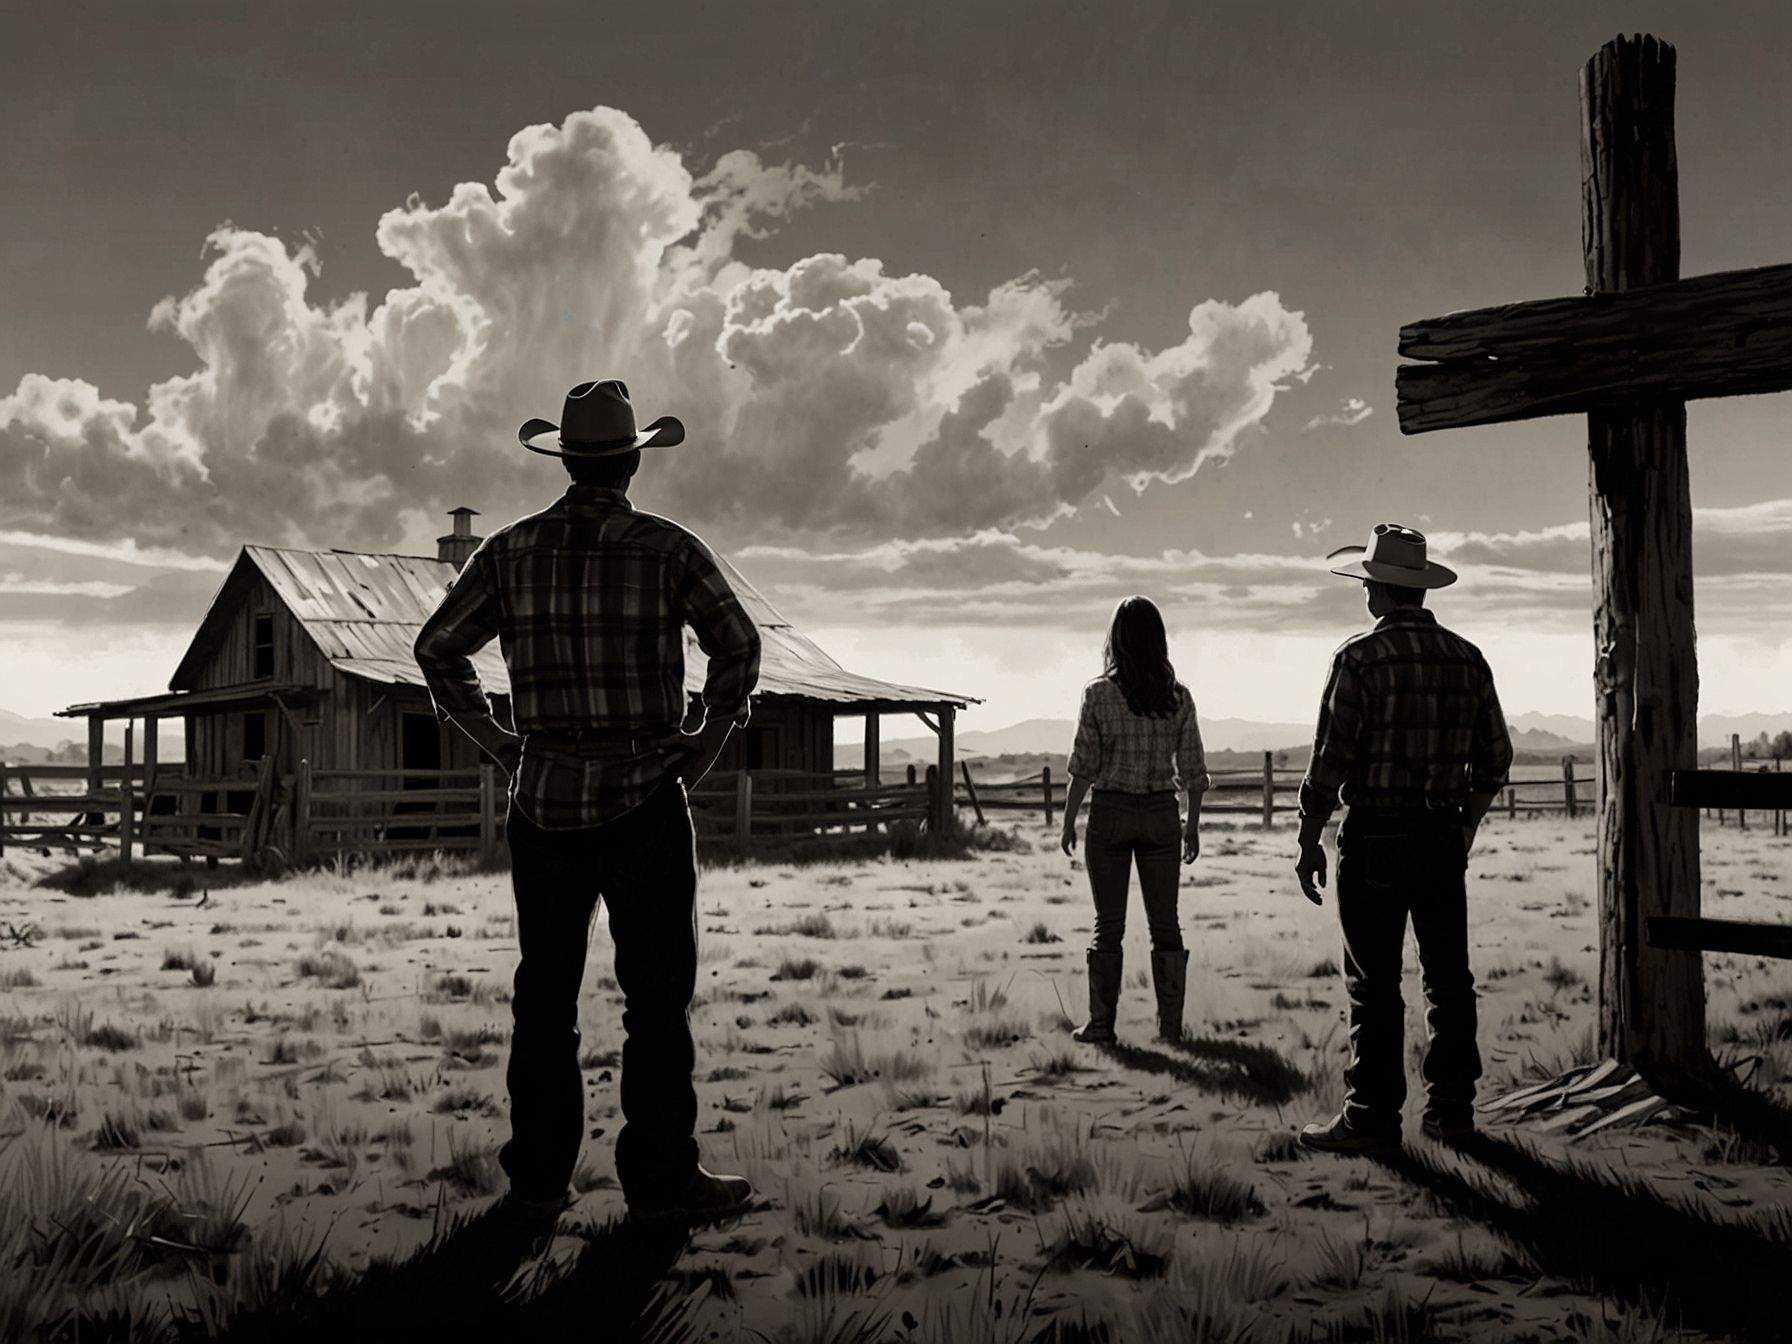 An image showing the Dutton family standing at their ranch during a tense moment, indicating the intense family dynamics that continue to unfold without John Dutton's presence.